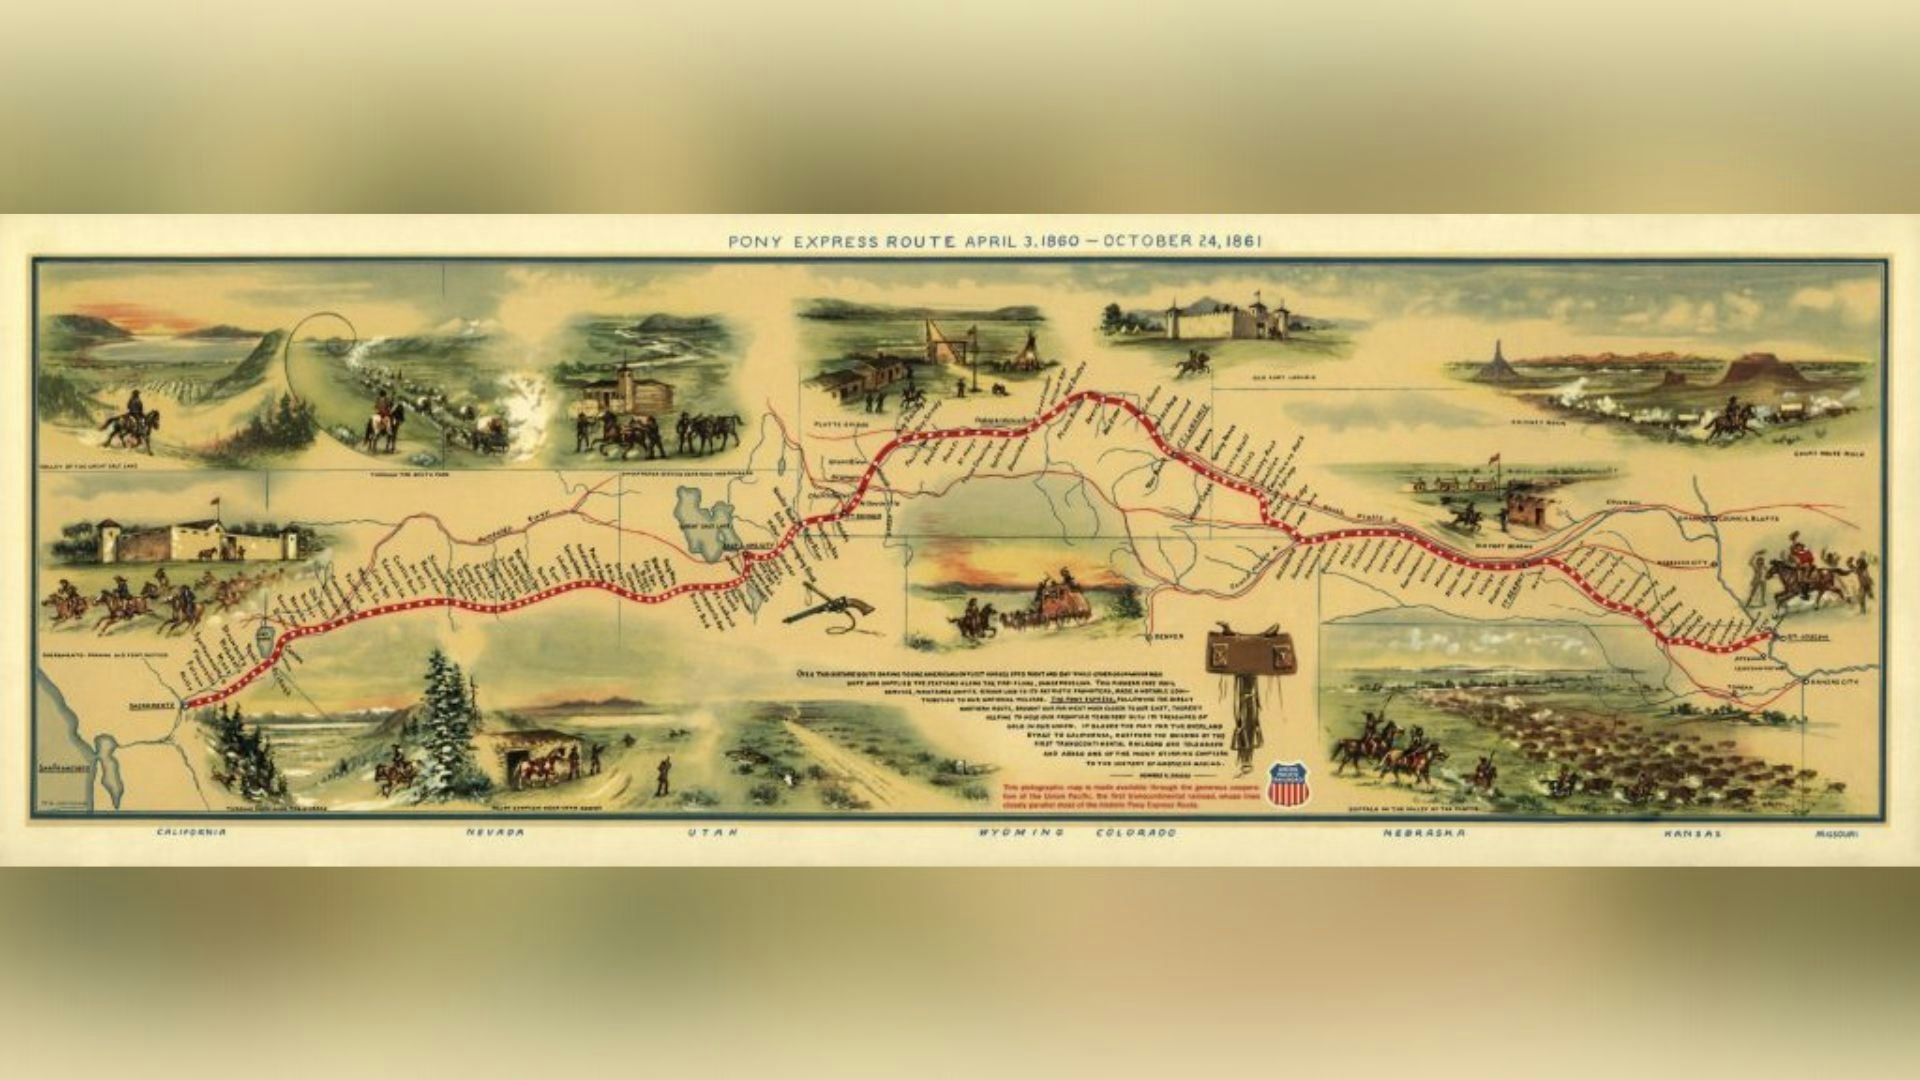 The historic Pony Express route across the U.S. West.